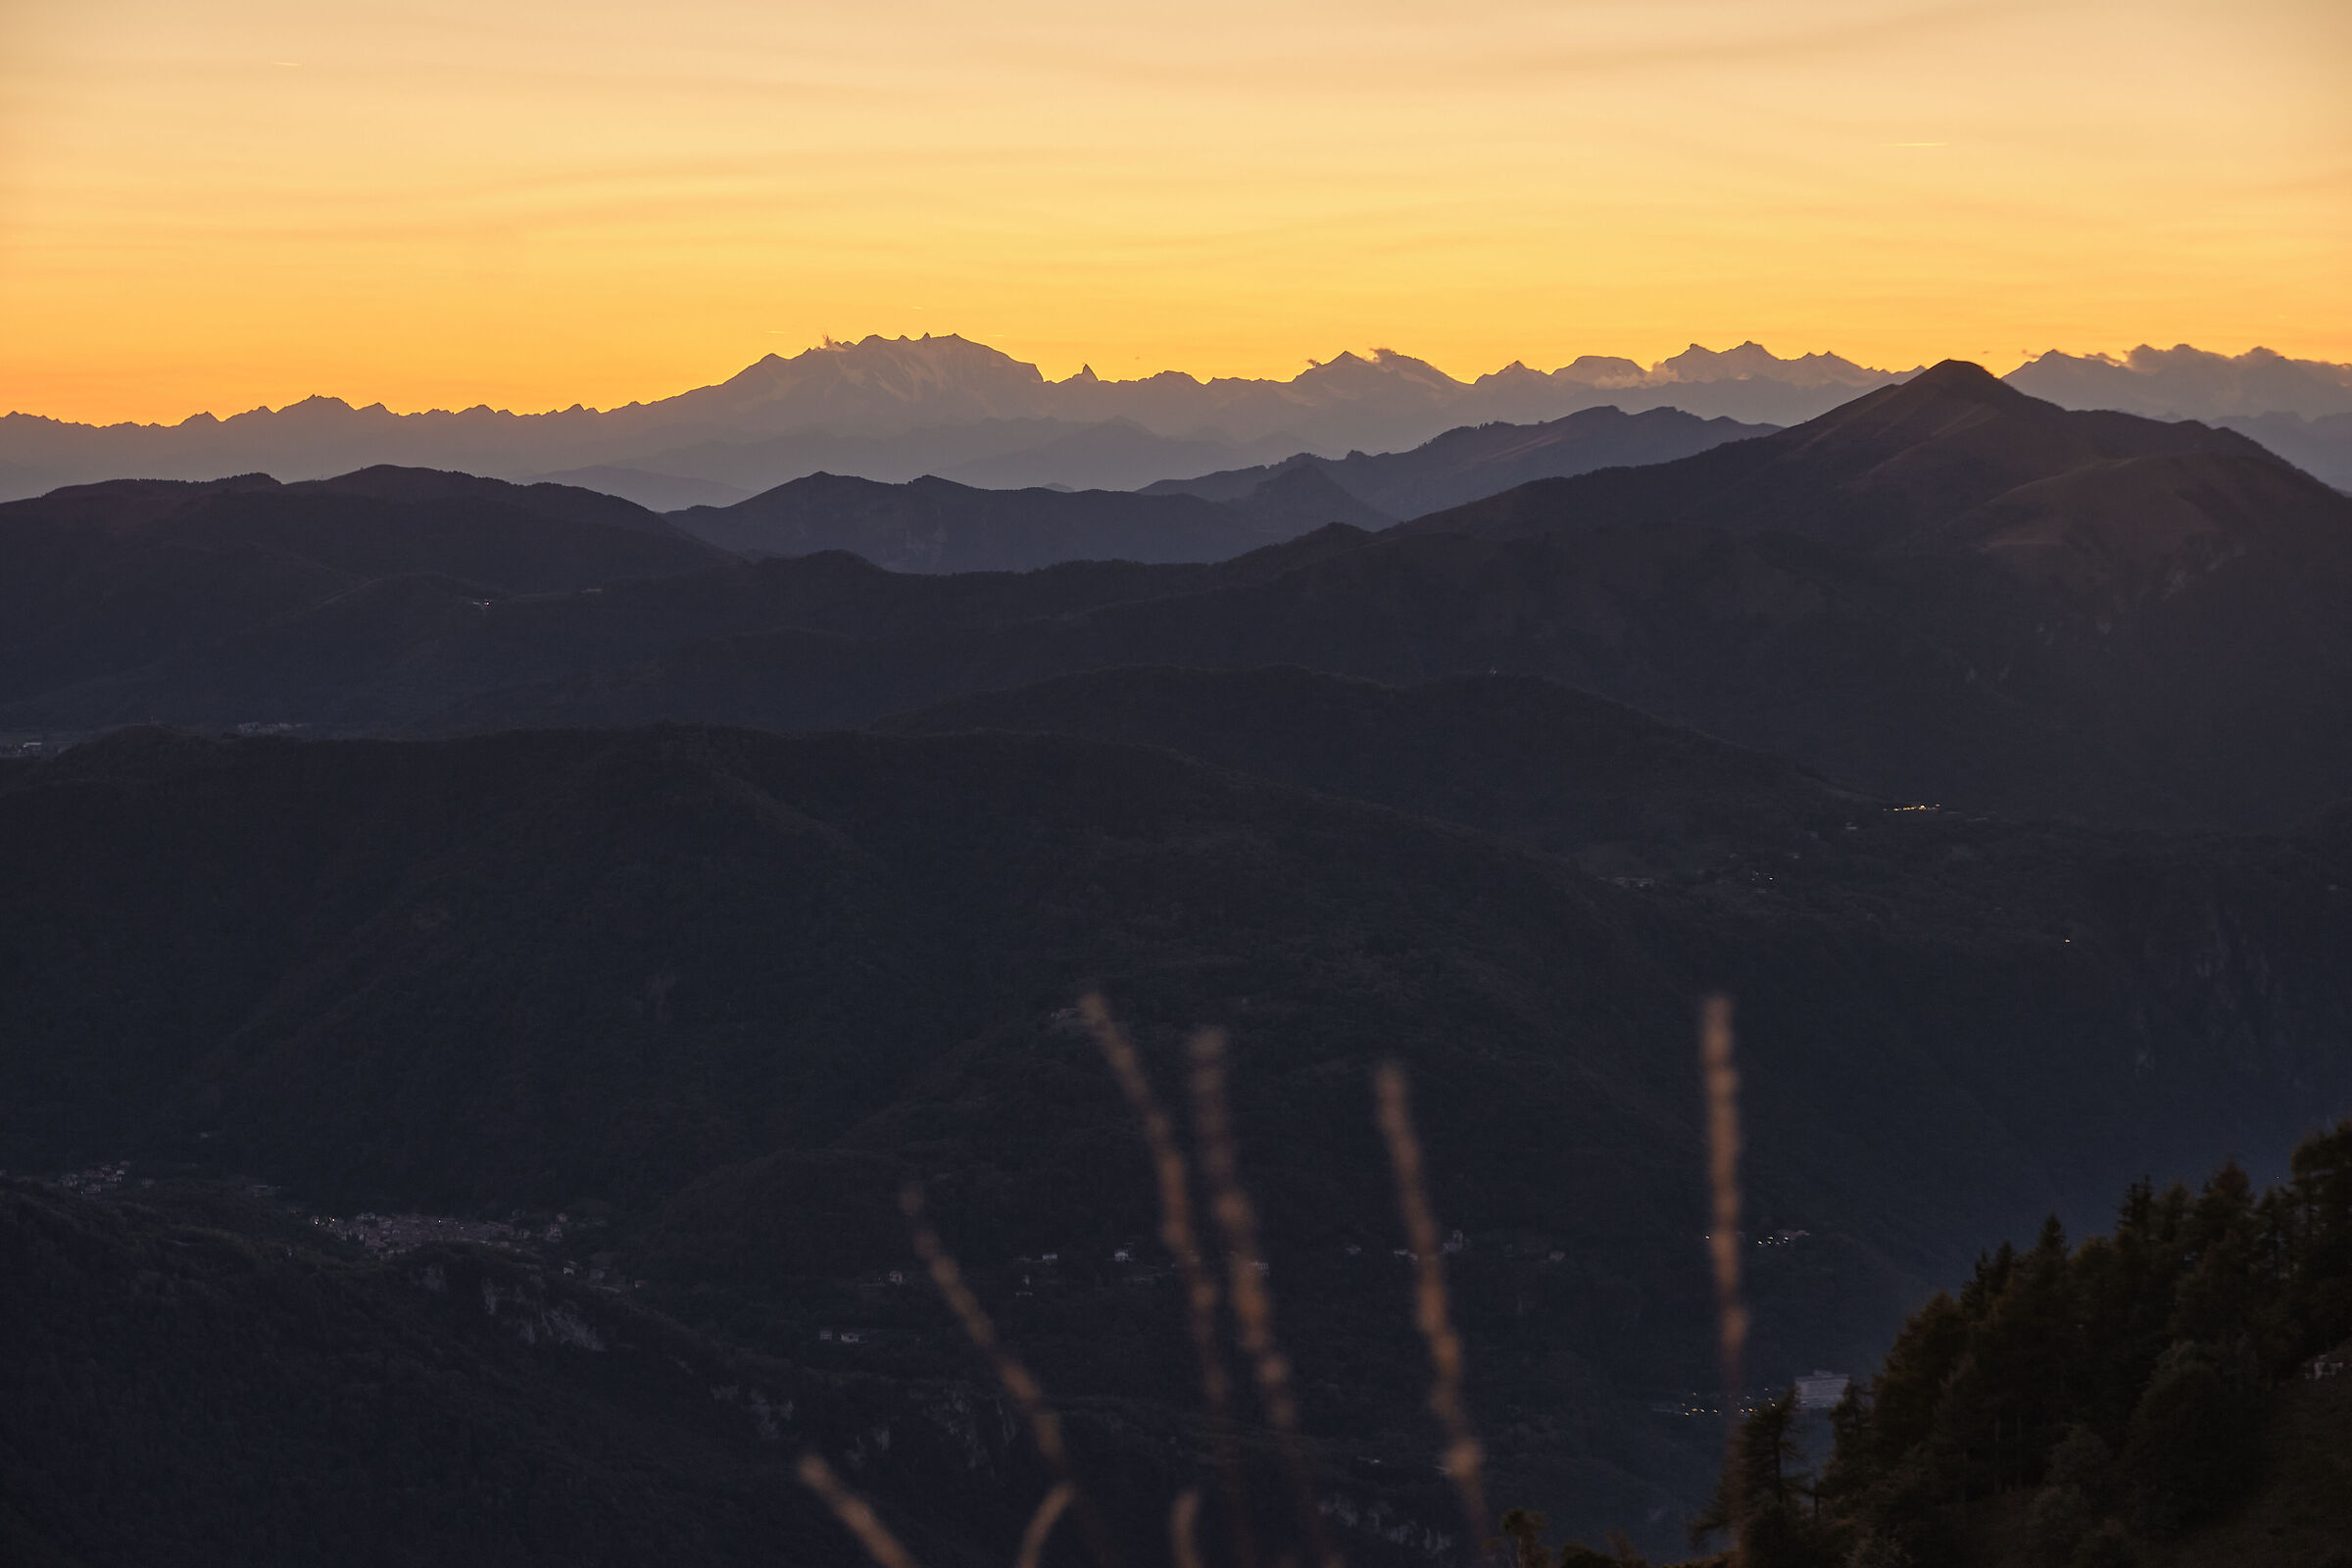 Monte Rosa at sunset from Piani Resinelli...